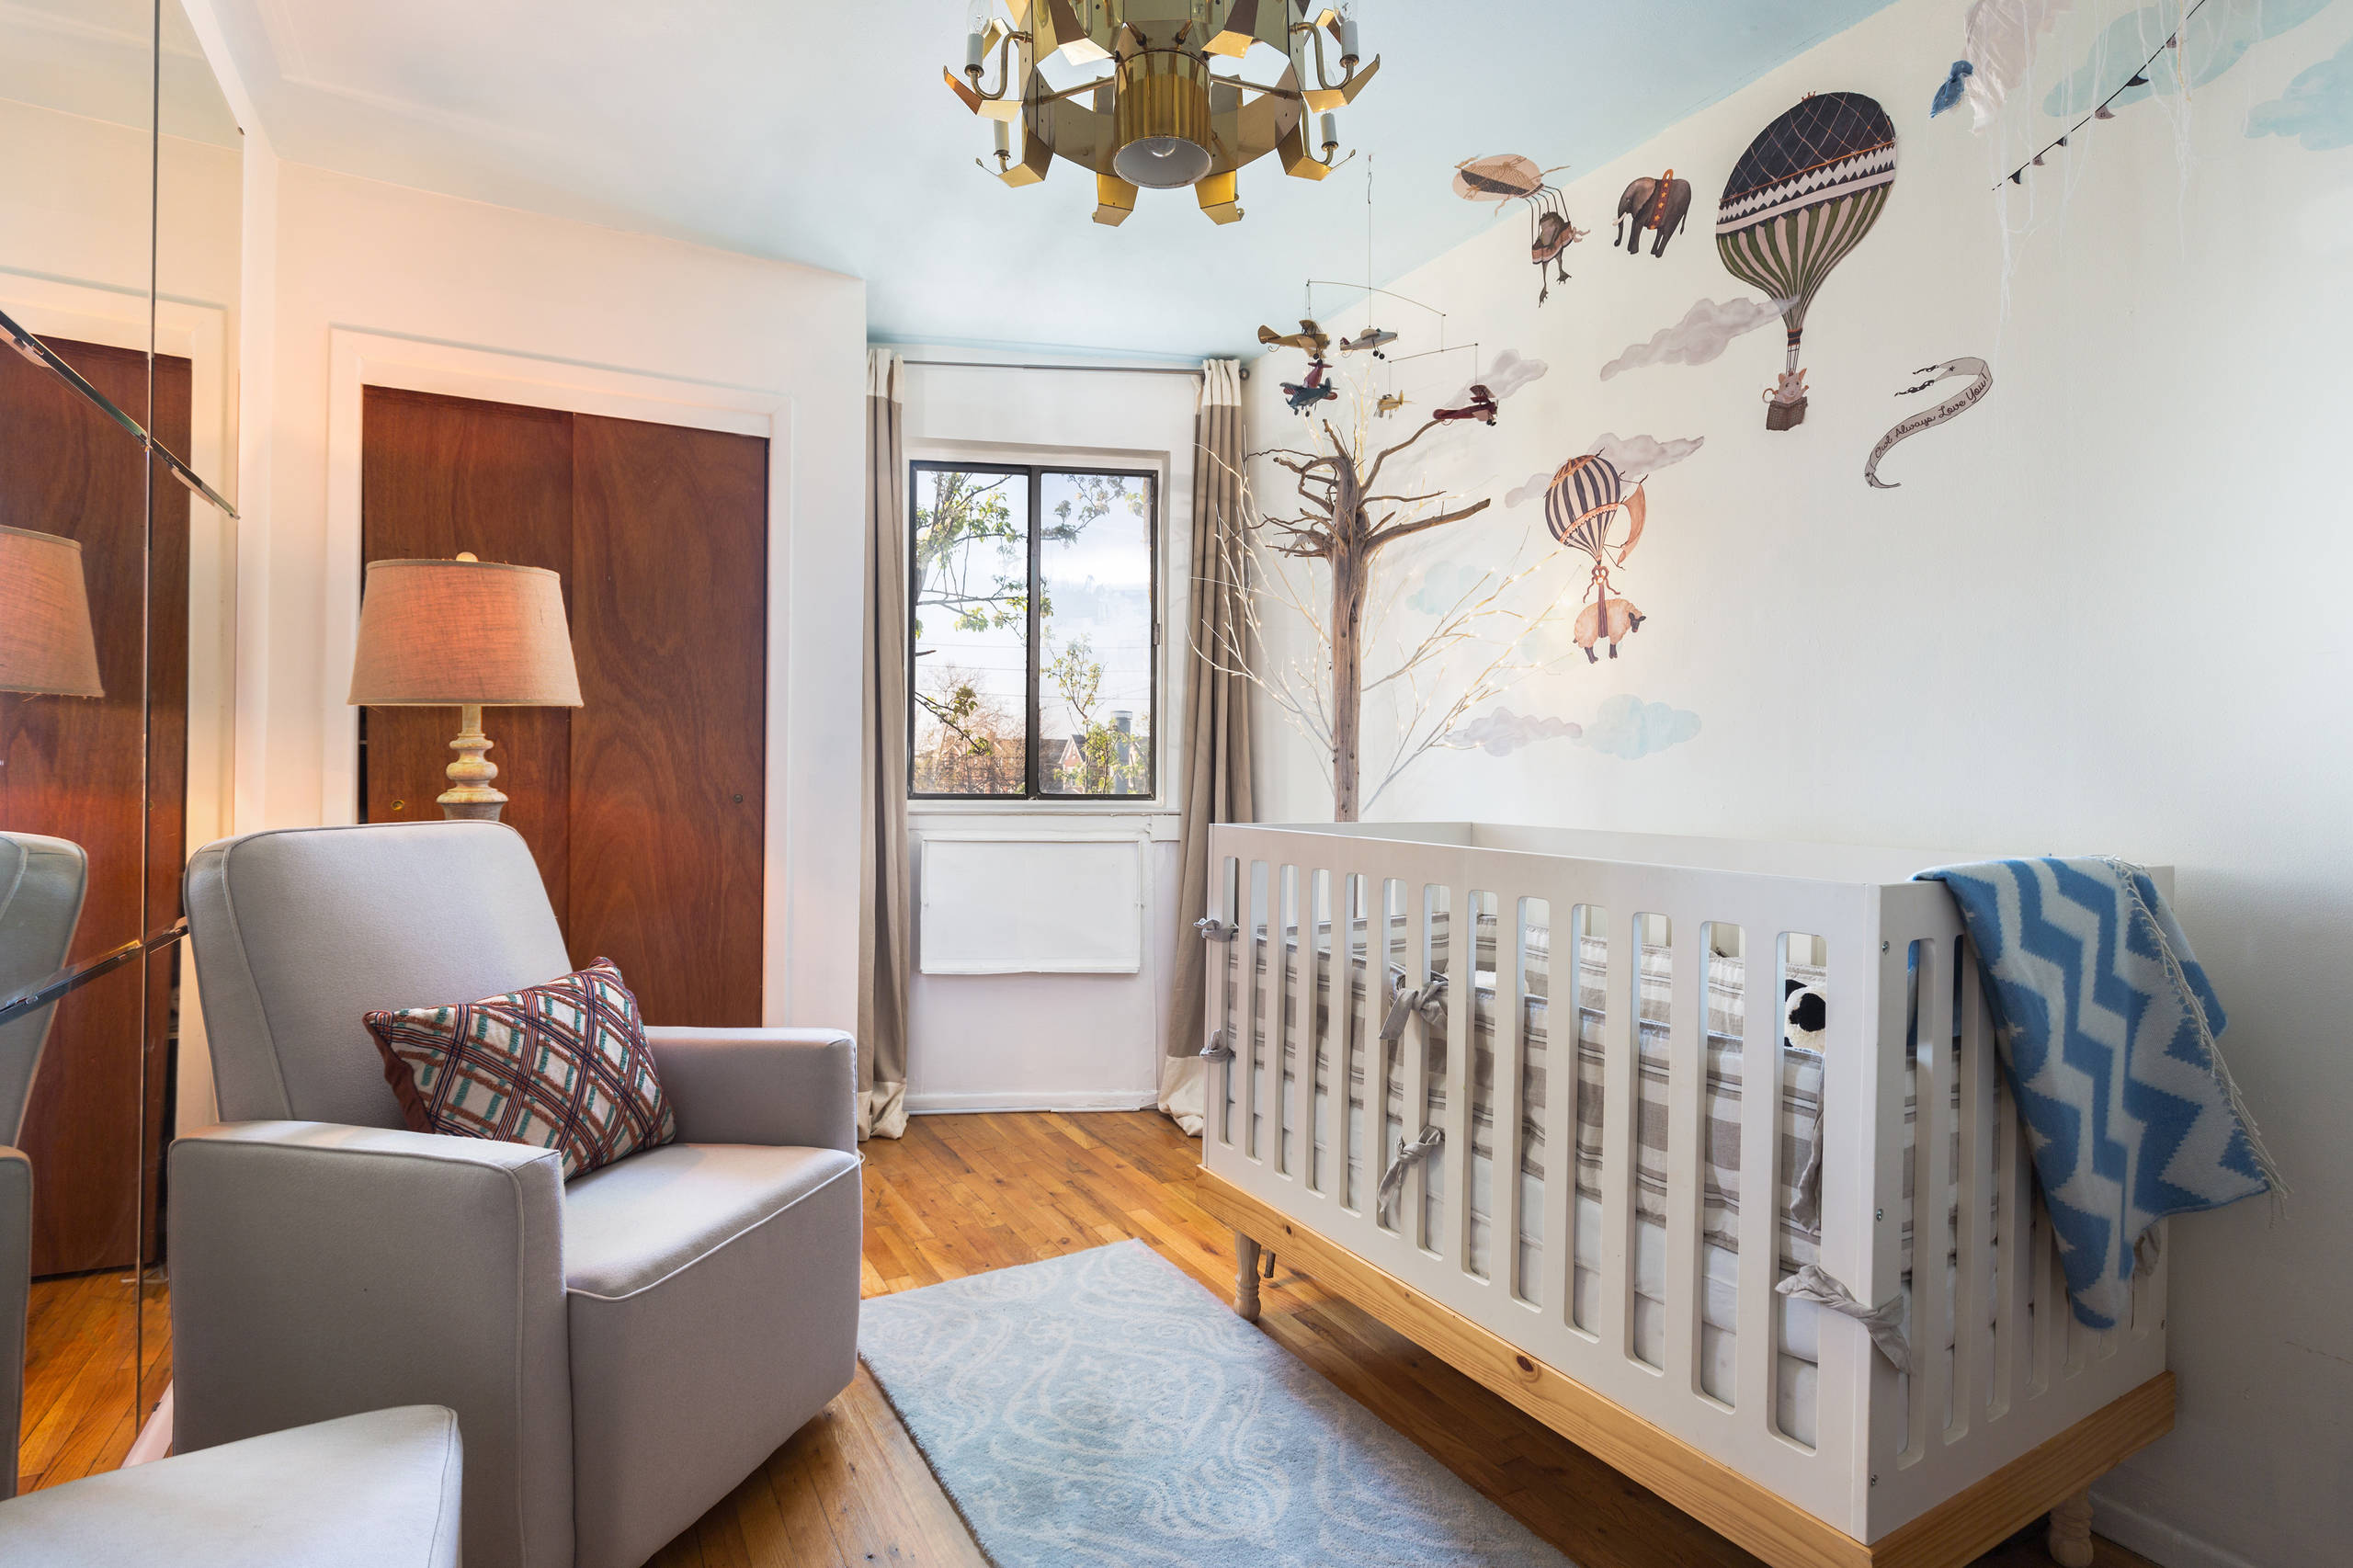 17 Delightful Eclectic Kids' Room Designs With A Cozy Look